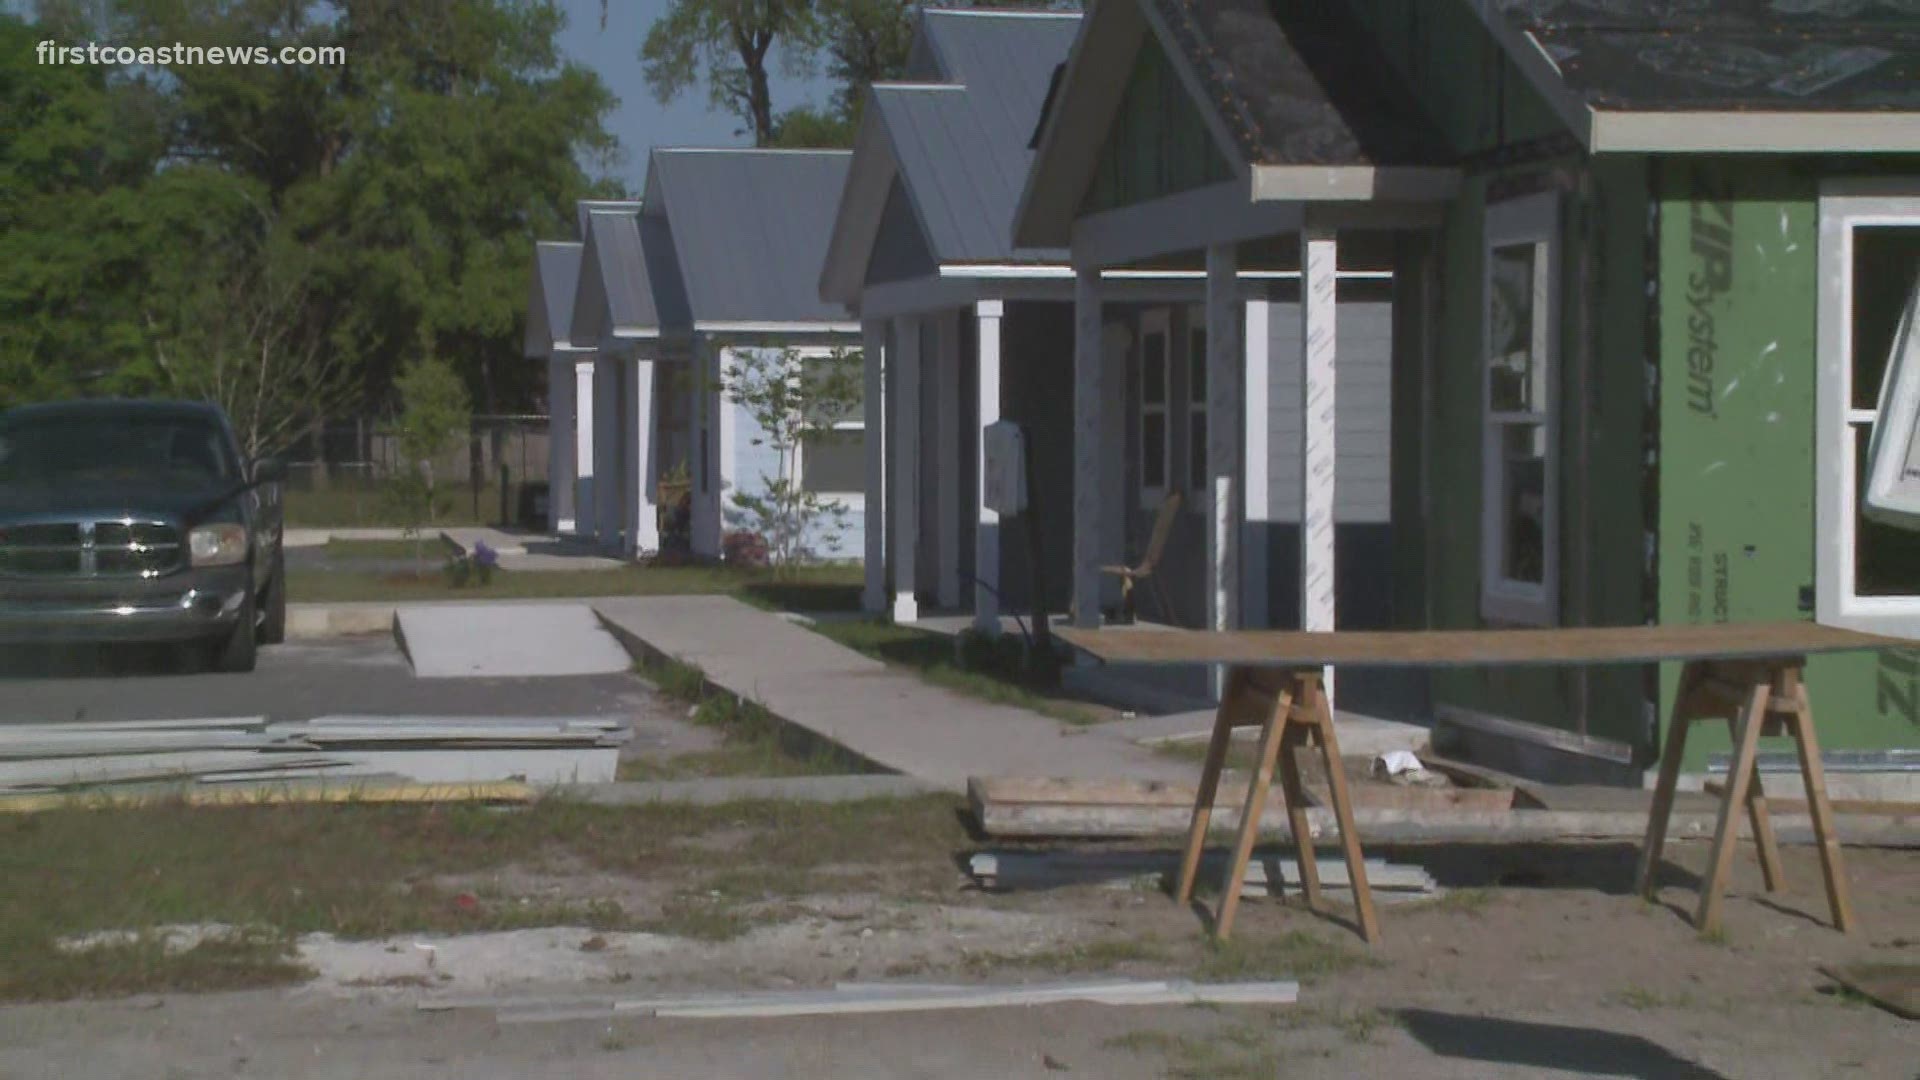 It’s getting harder and harder to find affordable housing in St. Johns County. Commissioners are considering redefining what affordable even means.